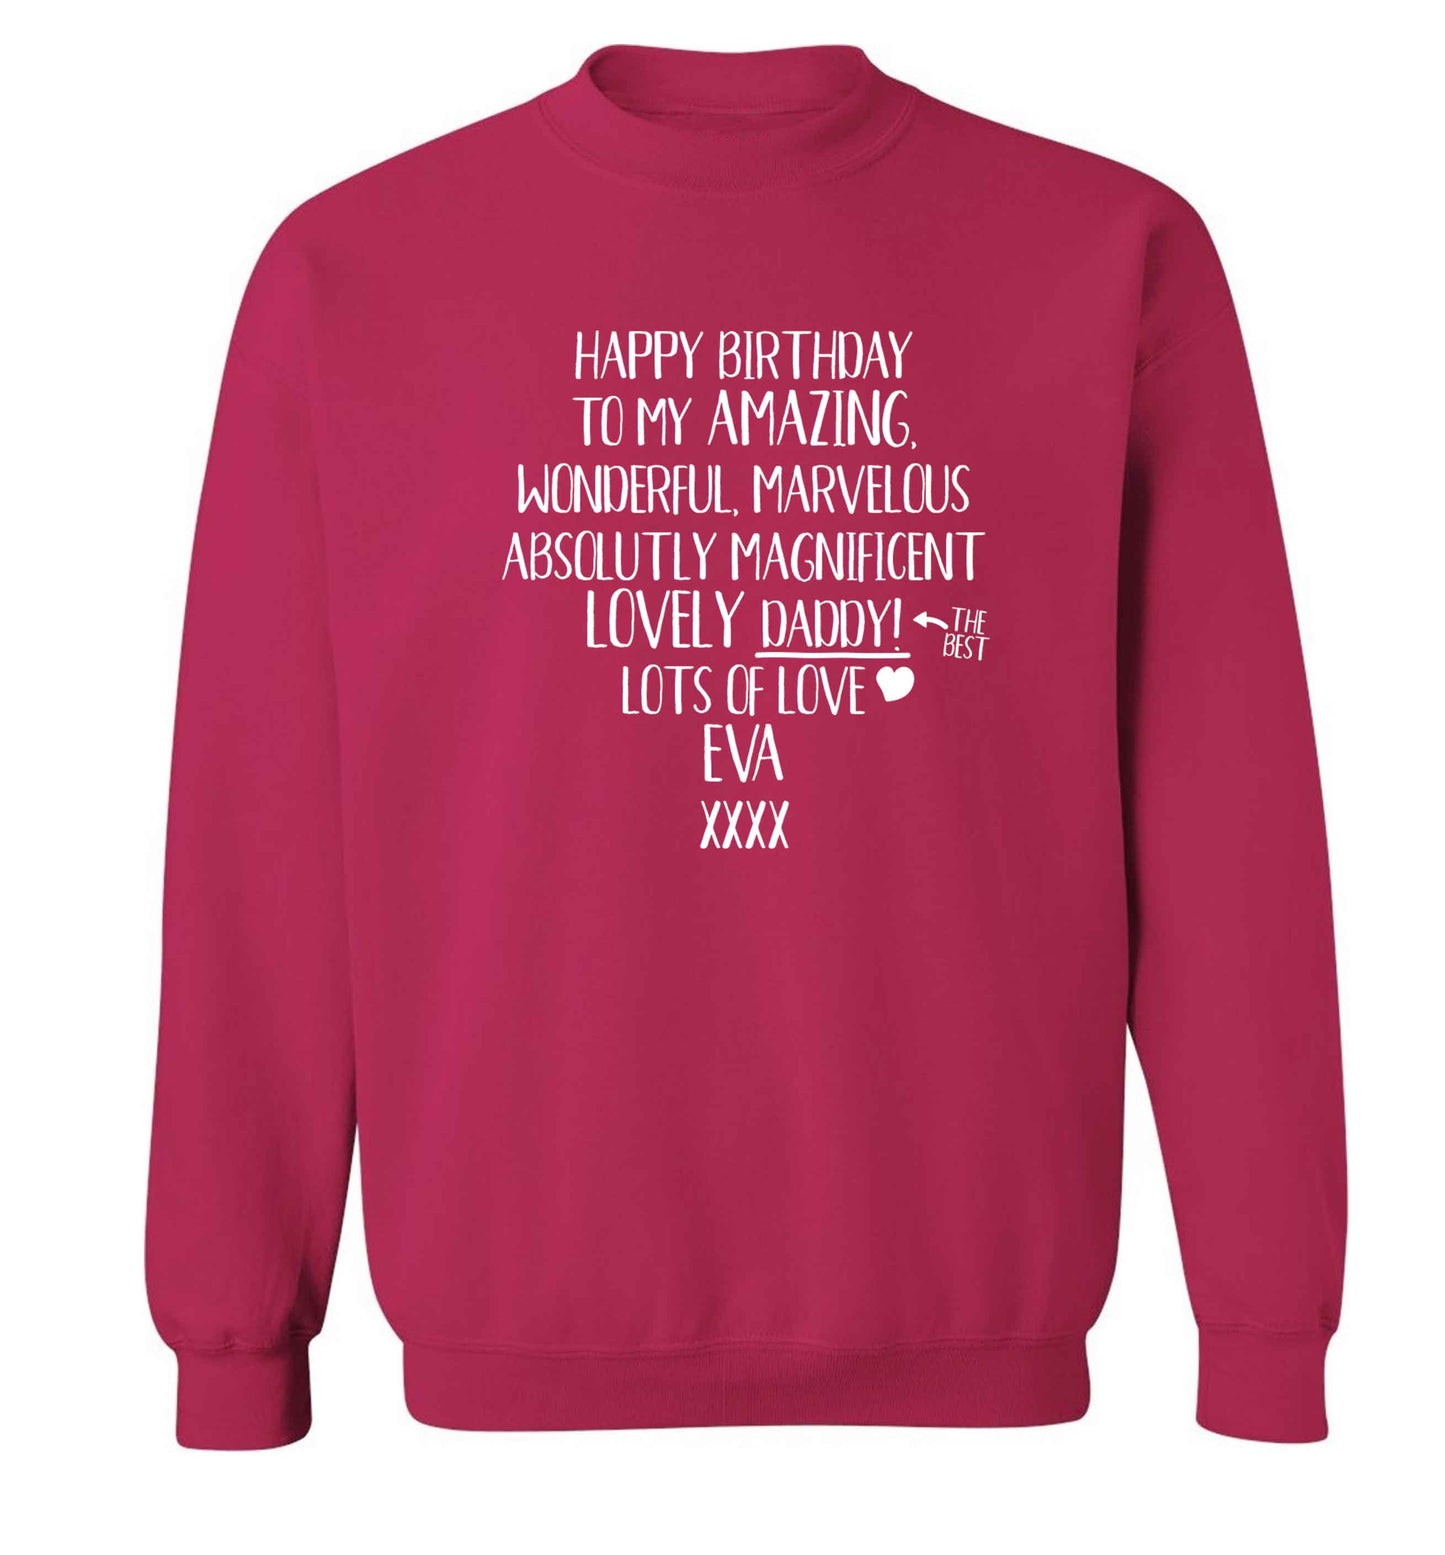 Personalised happy birthday to my amazing, wonderful, lovely daddy Adult's unisex pink Sweater 2XL